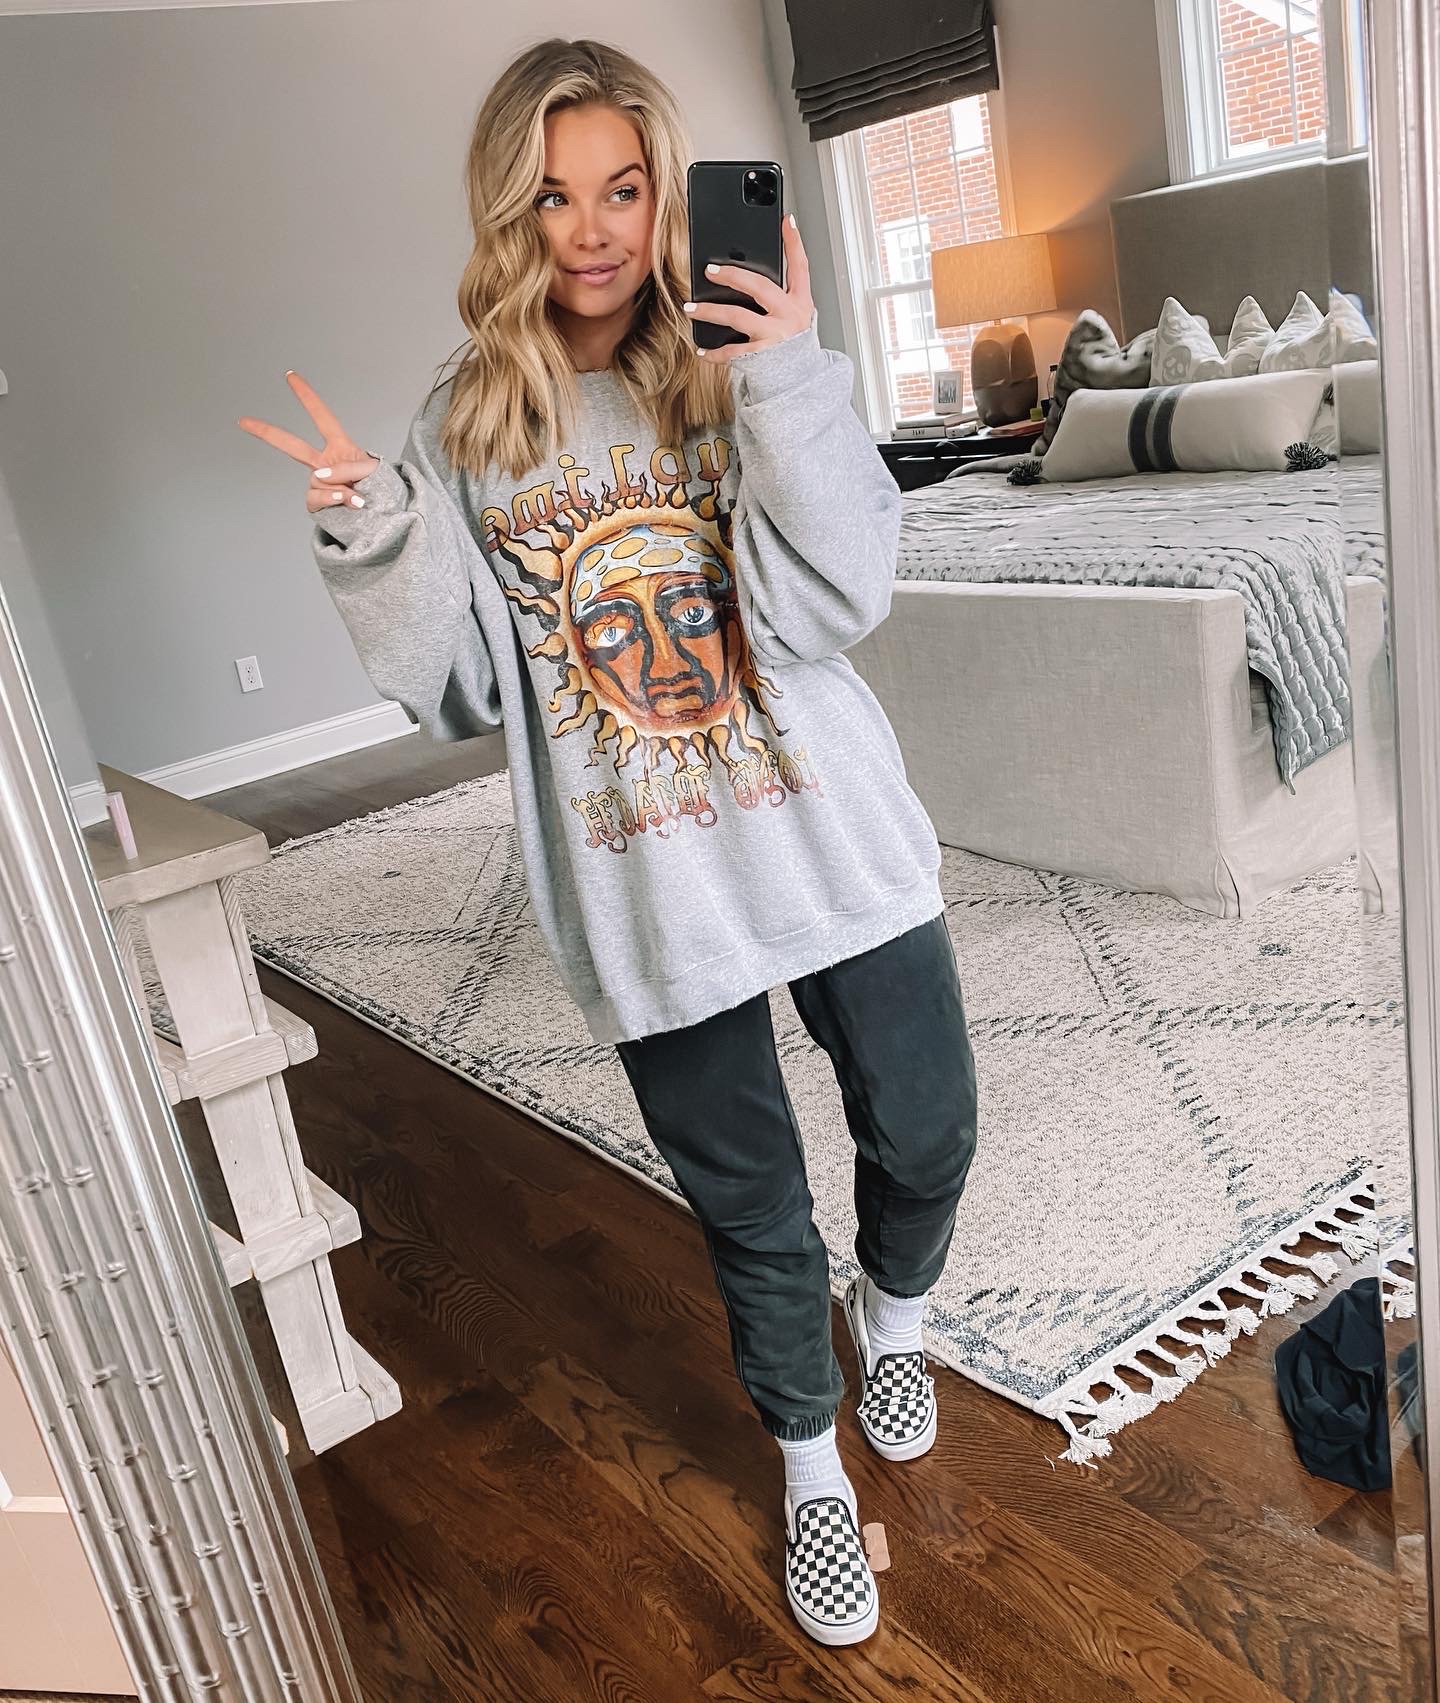 How to style graphic tees for loungewear